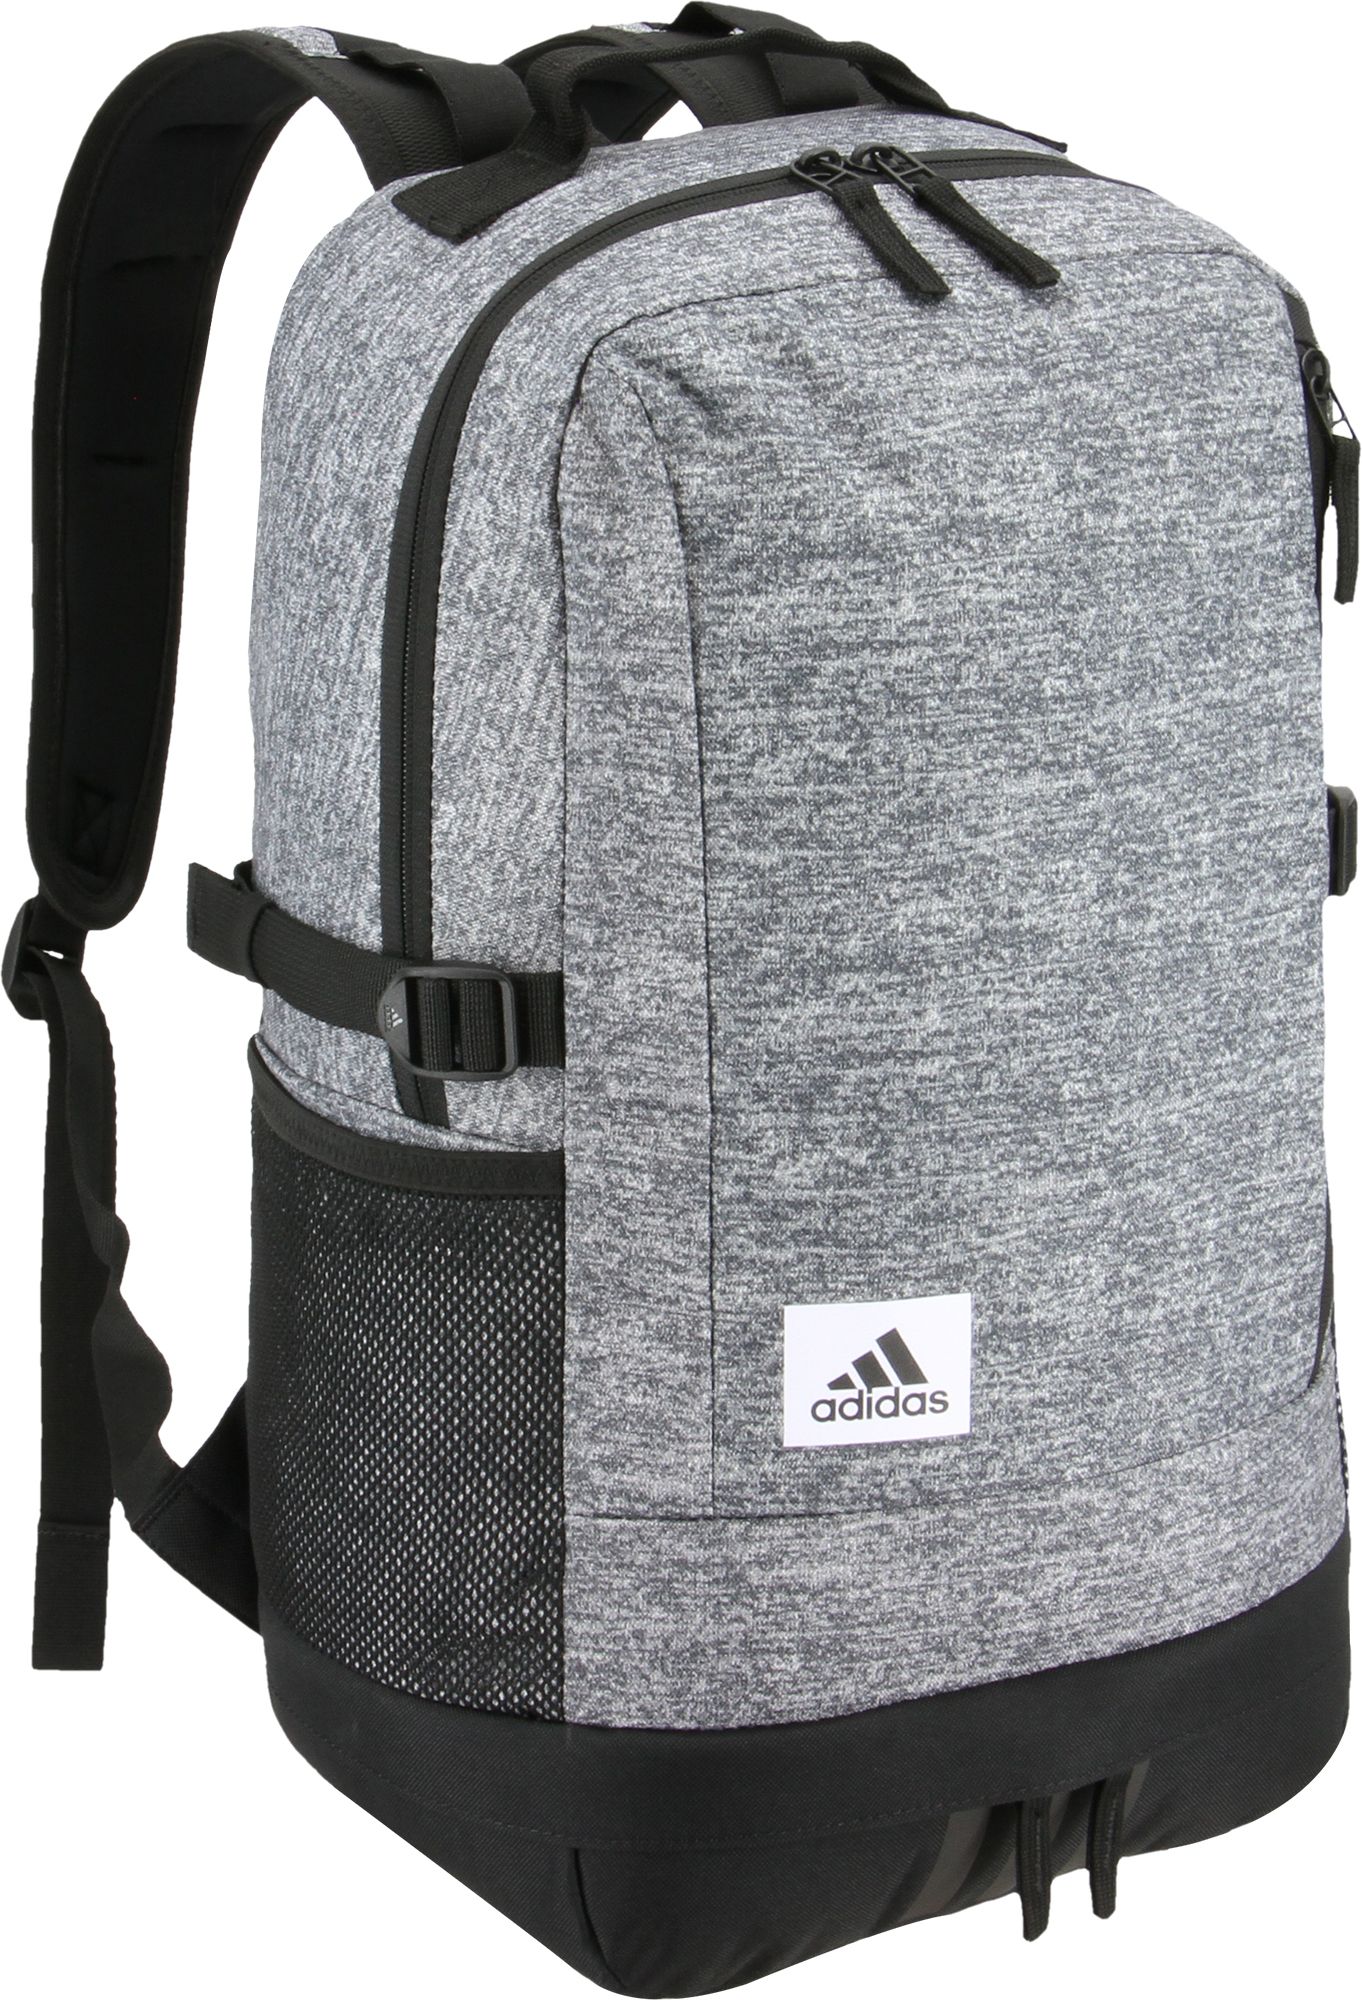 adidas Franchise Backpack | DICK'S 